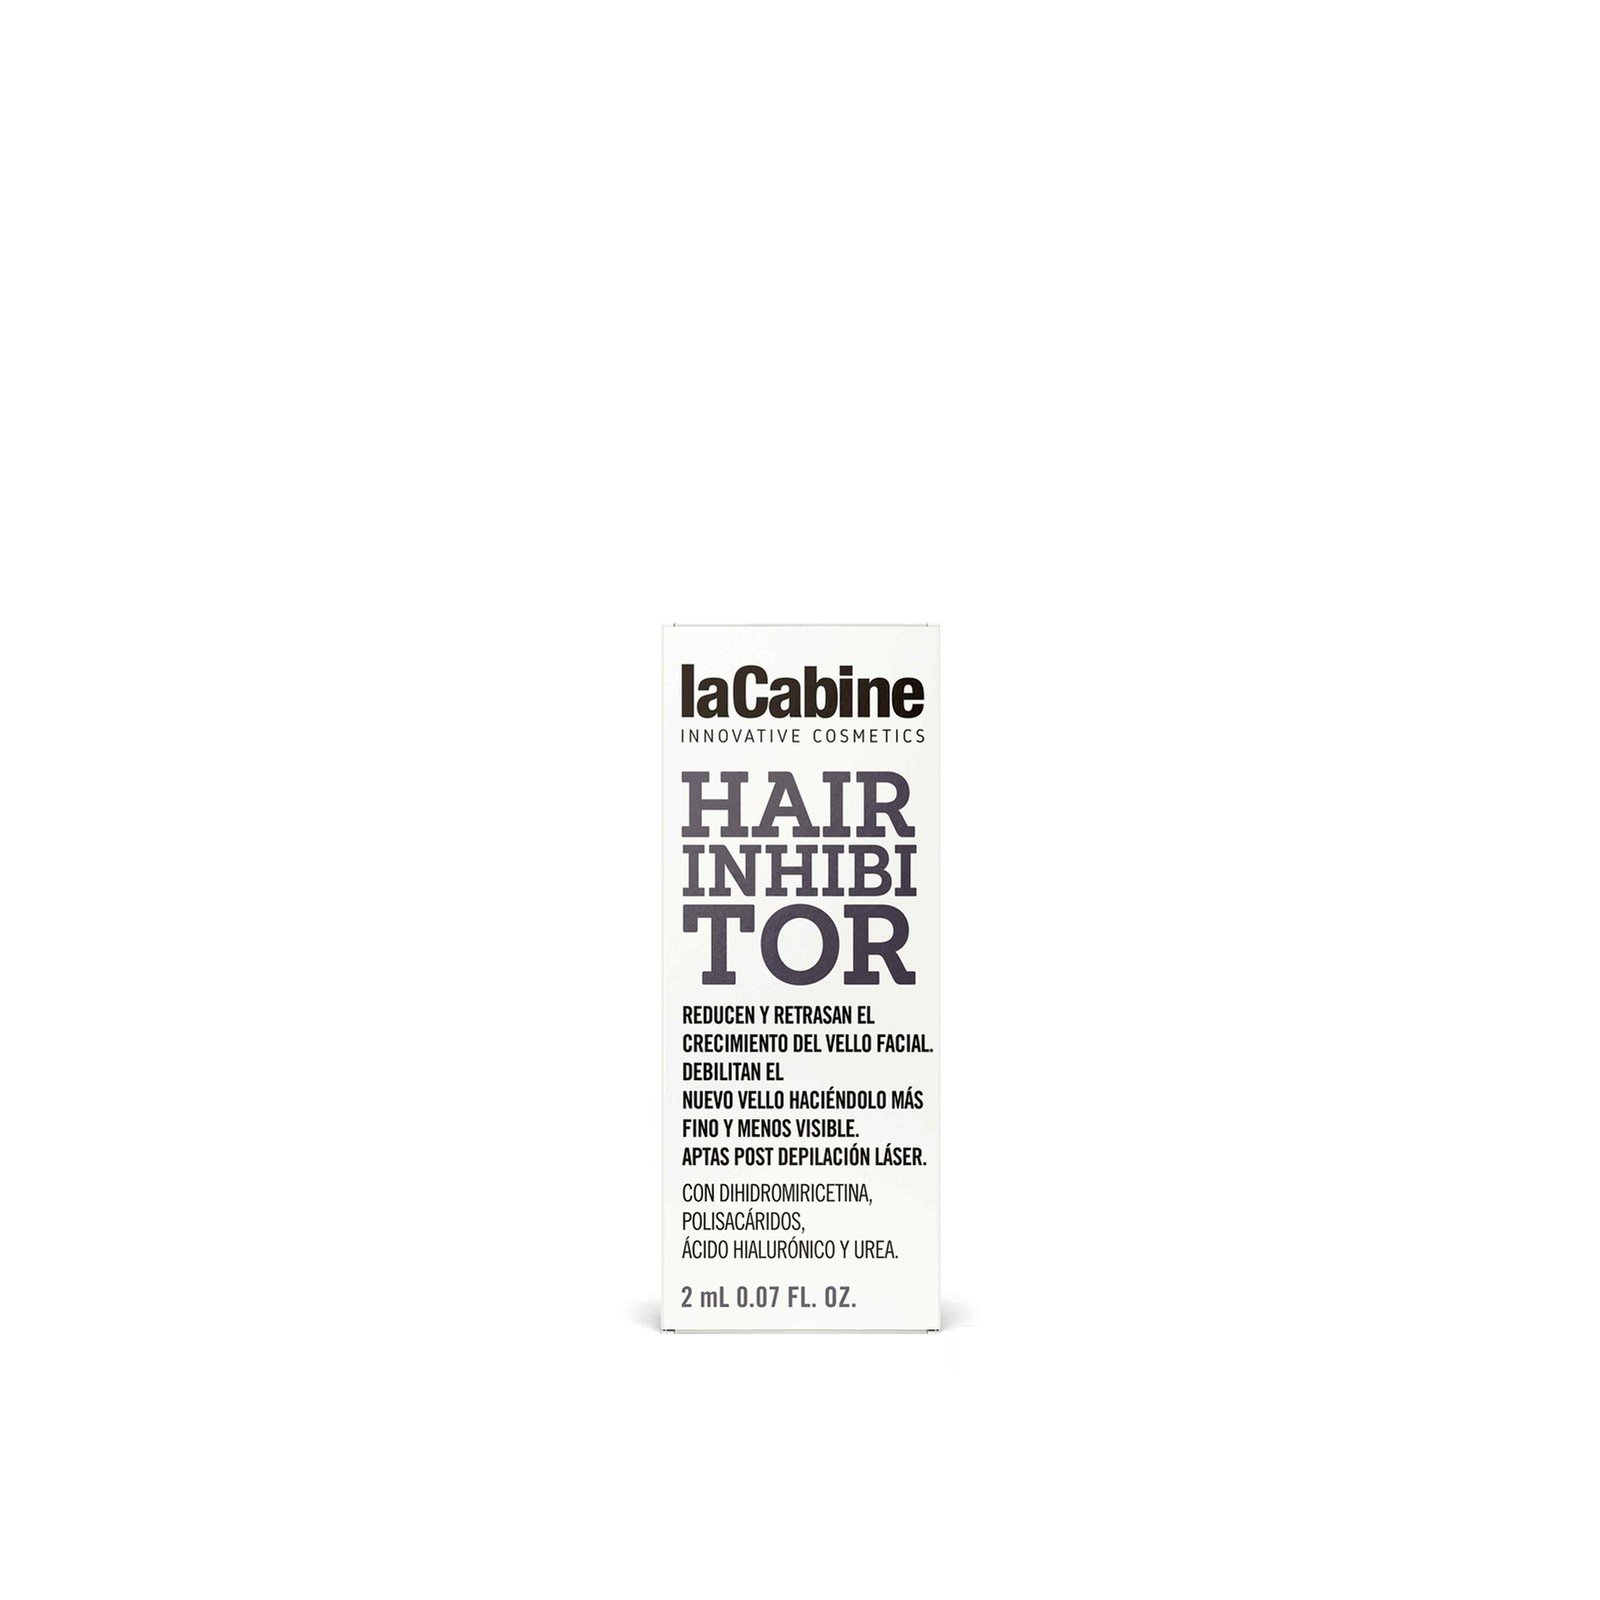 La Cabine Hair Inhibitor Concentrated Ampoule 1x2ml (1x0.07 fl oz)